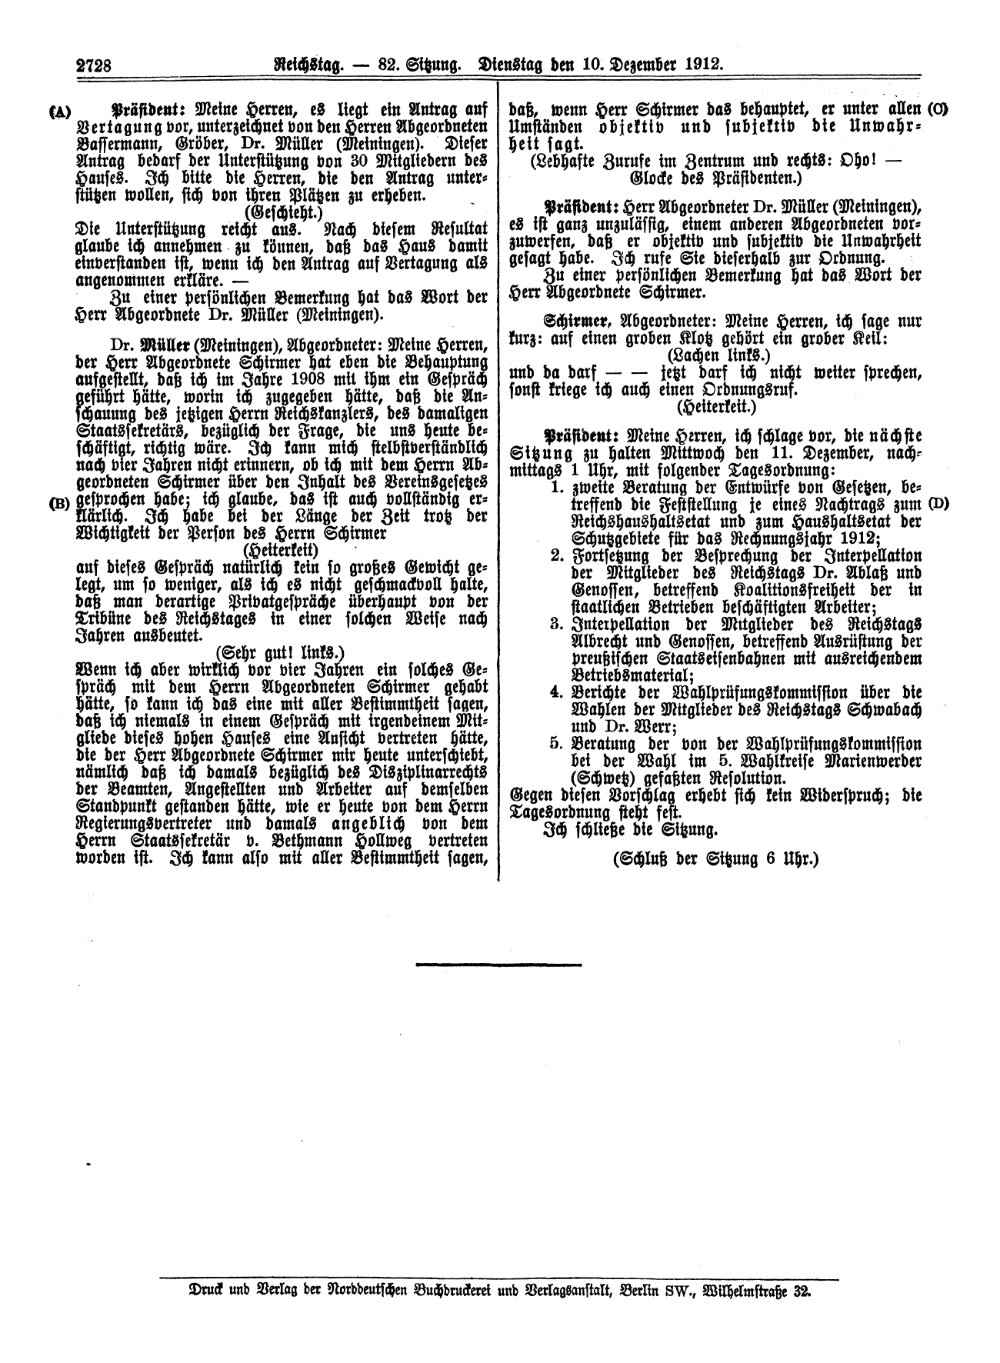 Scan of page 2728